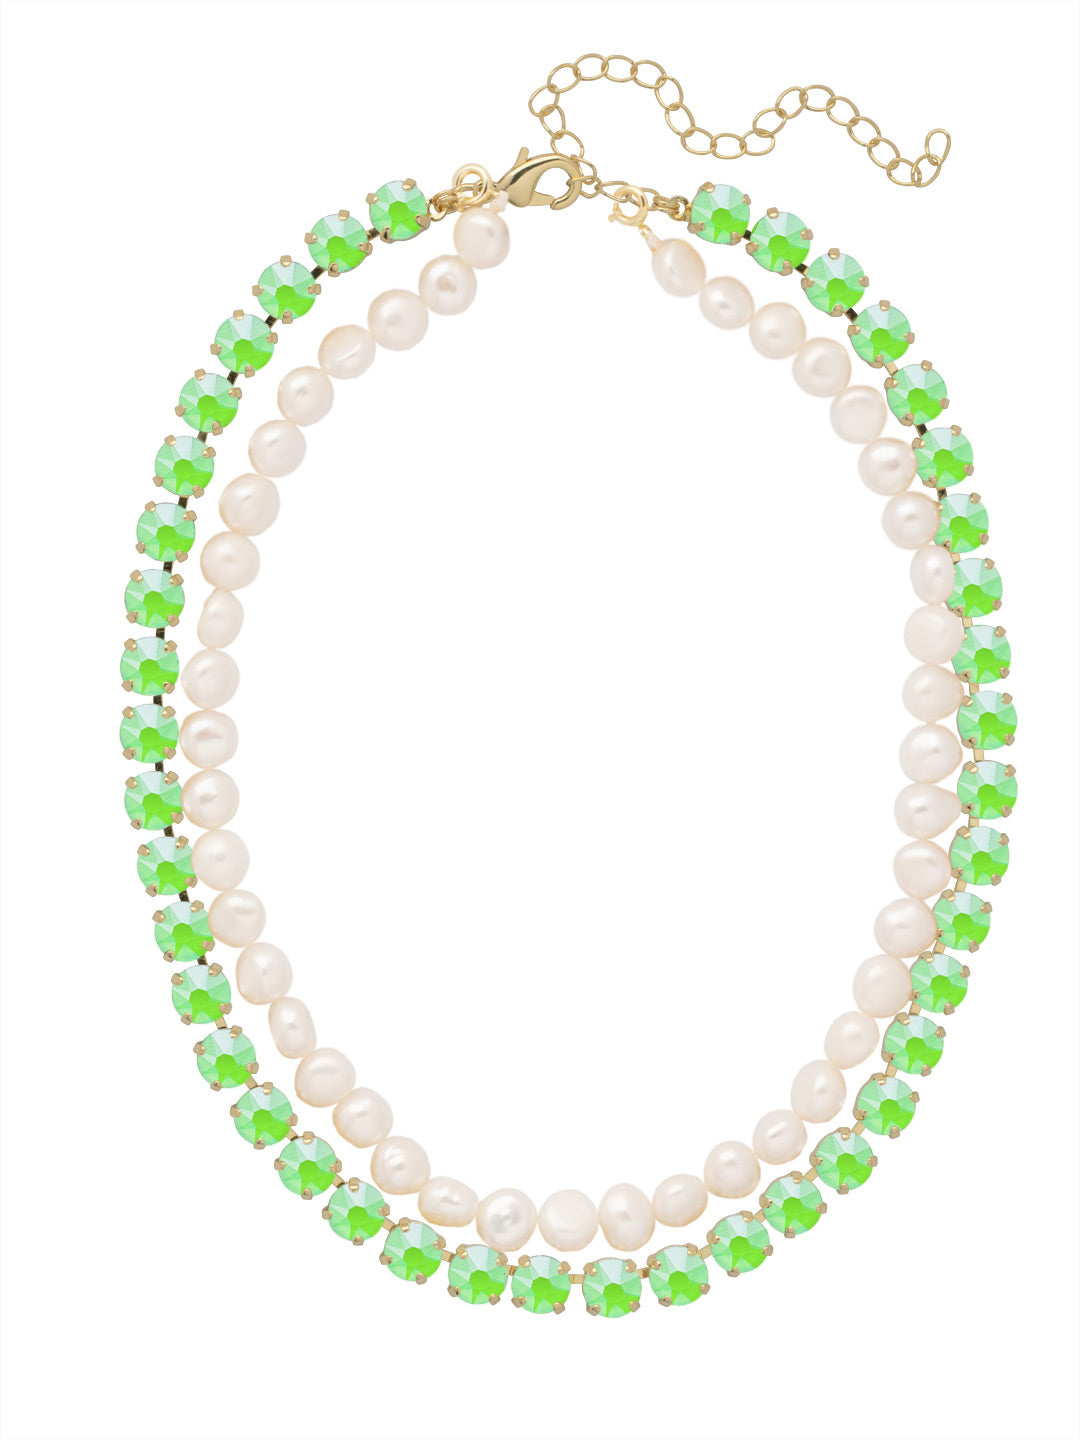 Matilda Layered Tennis Necklace - 4NFL18BGETG - <p>The Matilda LayeredTennis Necklaces features a tennis necklace with lined with round cut crystals on an adjustable chain, secured with a lobster claw clasp, and a strand of freshwater pearls with a spring ring clasp on either end. Remove the strand of peals and wear the crystal tennis necklace solo or easily clip on the strand of pearls for an effortless layered look! From Sorrelli's Electric Green  collection in our Bright Gold-tone finish.</p>